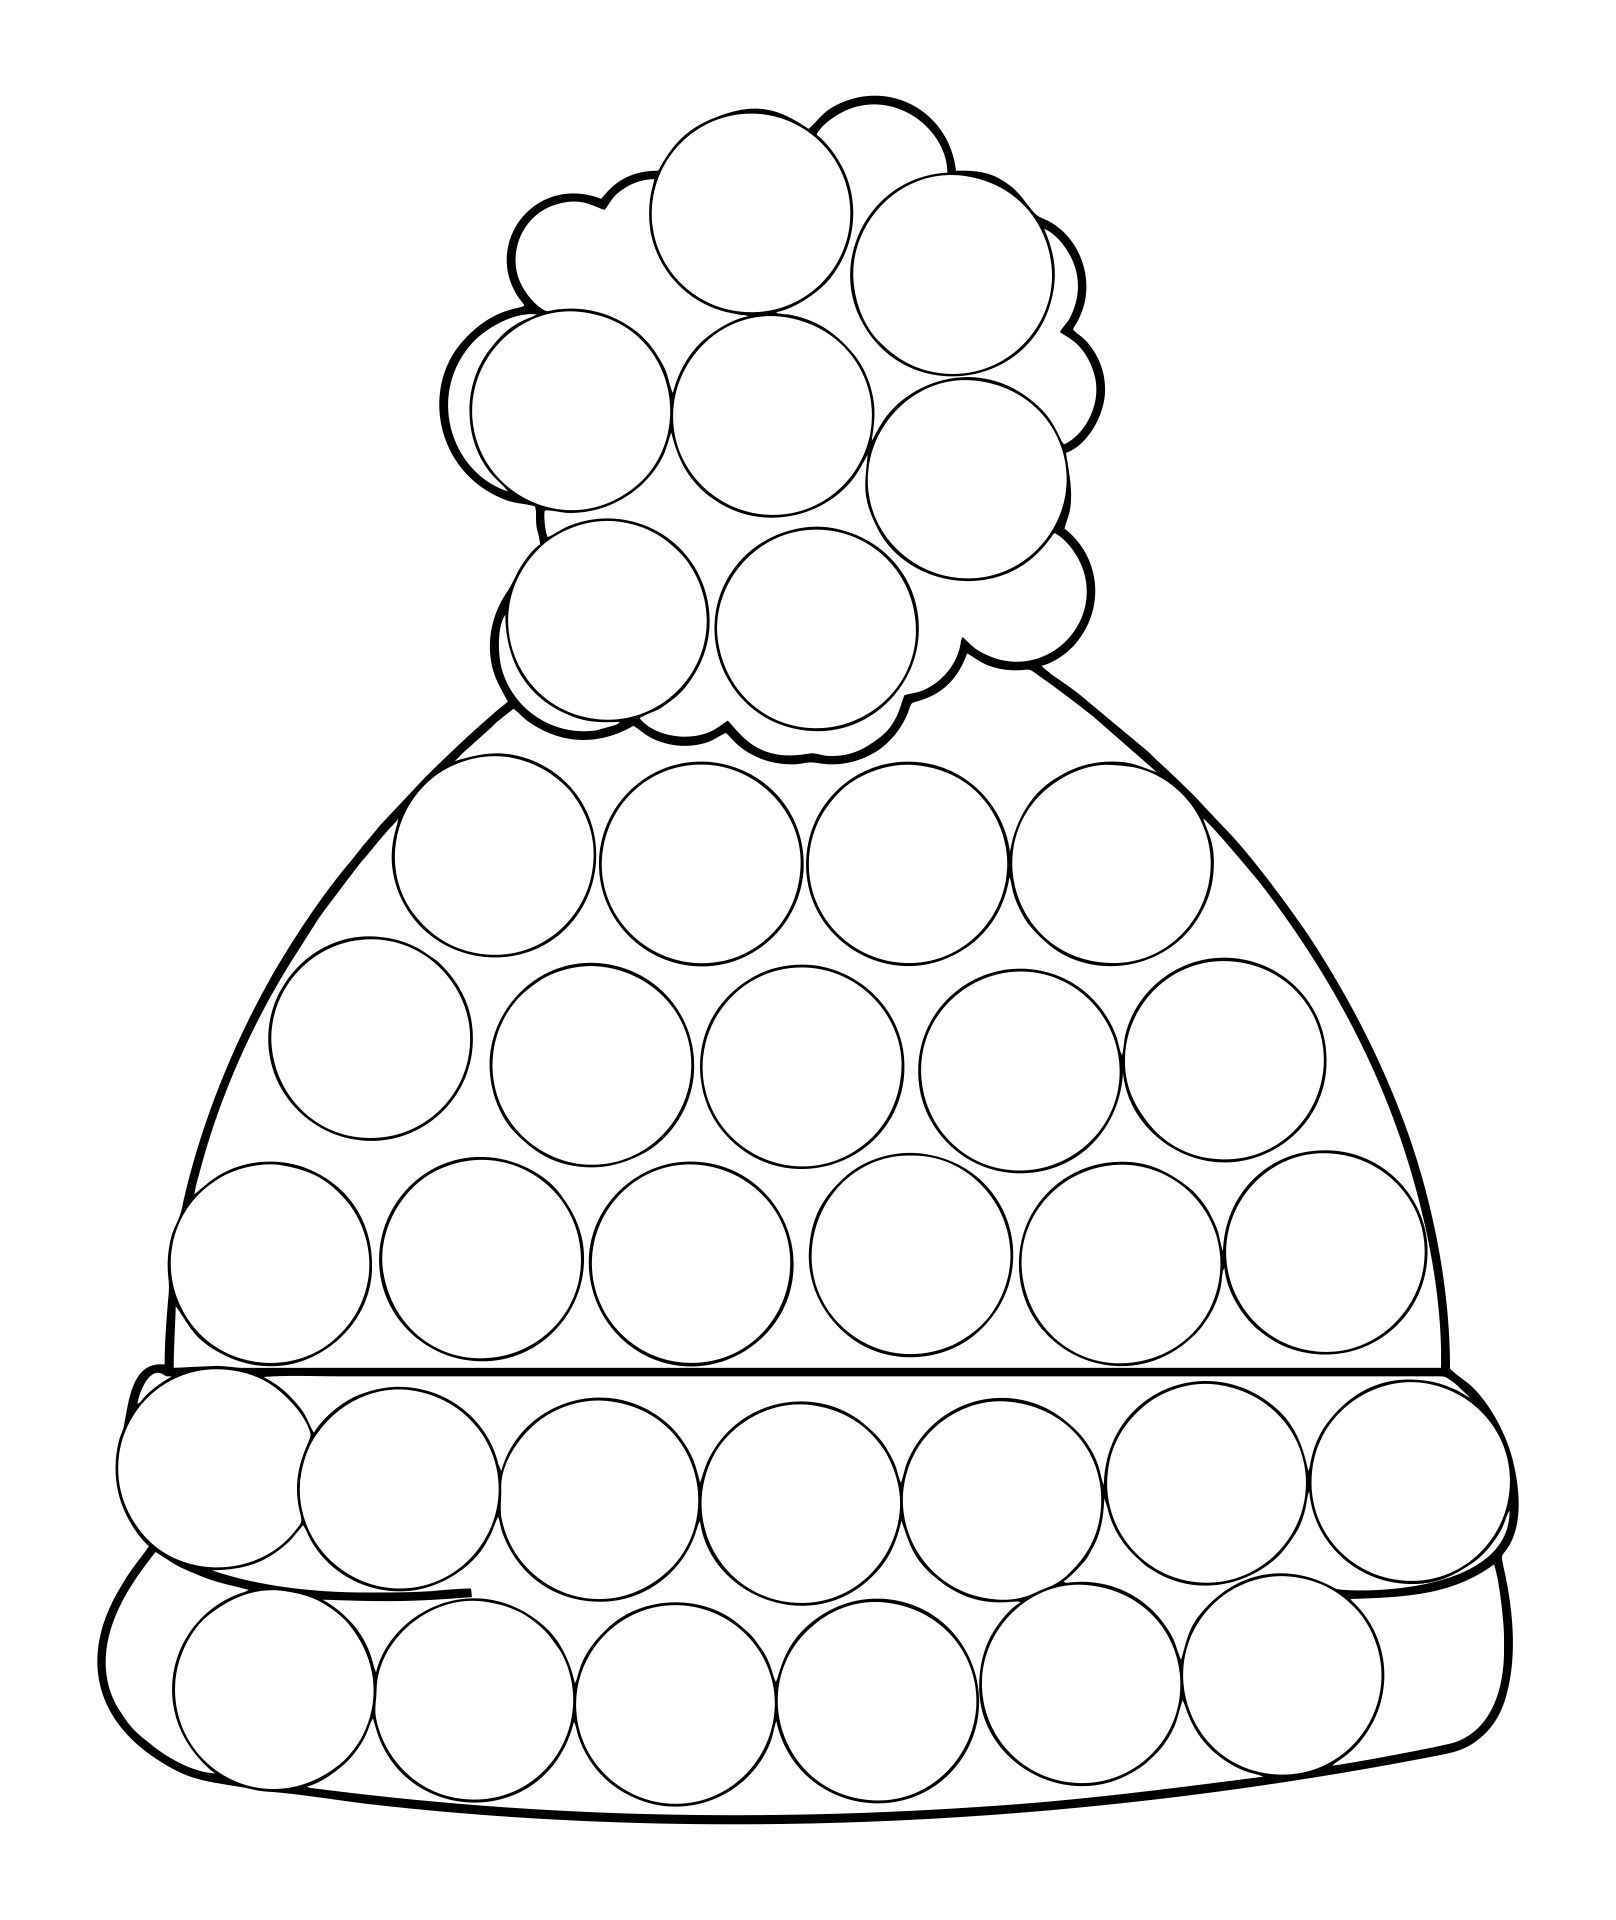 Dot Marker Coloring Pages Do A Dot Free Printable Art Dots Art - Do A Dot Art Pages Free Printable